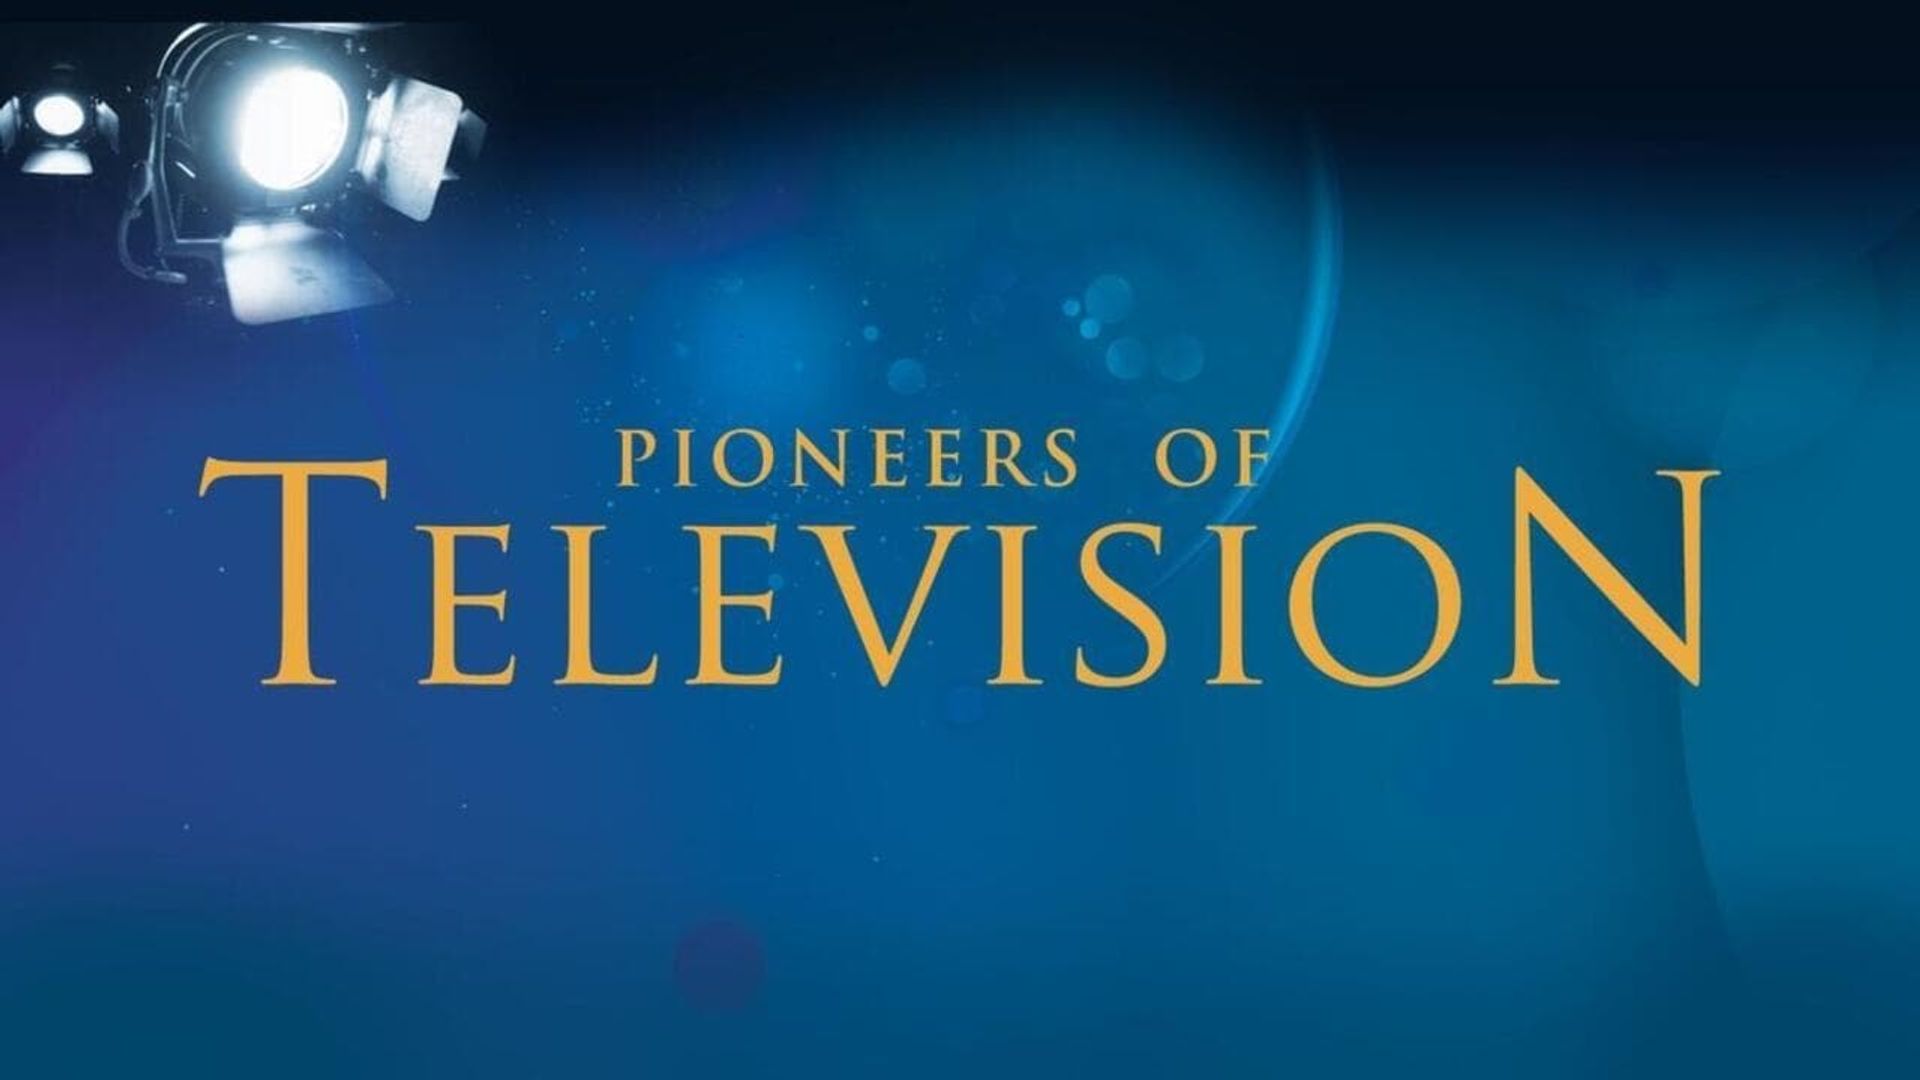 Pioneers of Television background